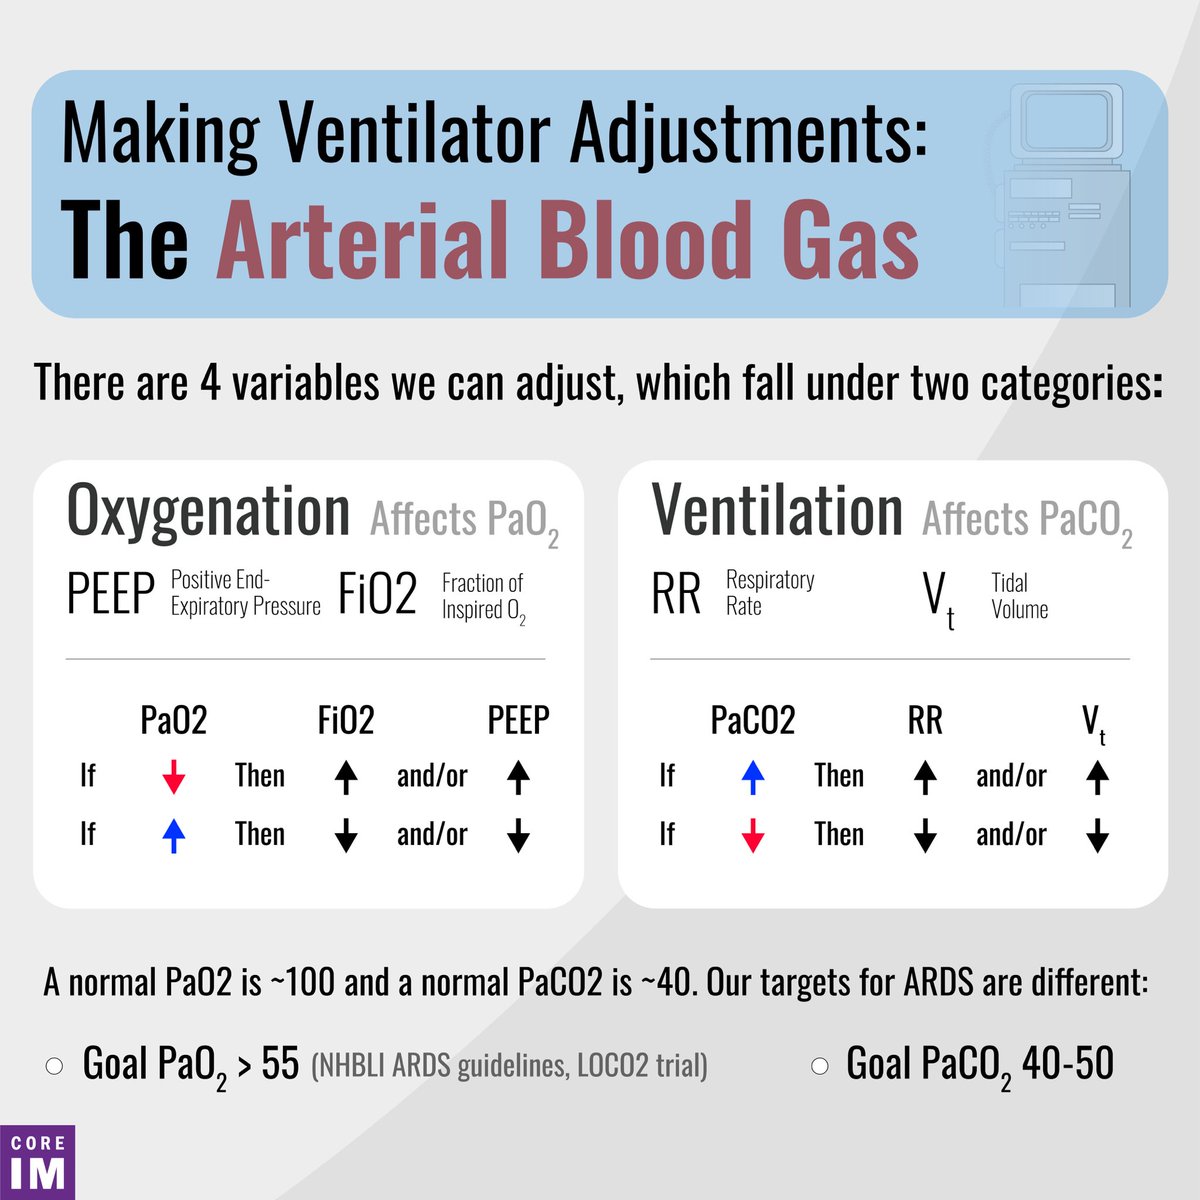 2/ There are 4 variables we might want to adjust on the vent based on our ABG results: PEEP, FiO2, RR and Vt. The first two we adjust to achieve appropriate oxygenation while the latter two we adjust to achieve adequate ventilation.